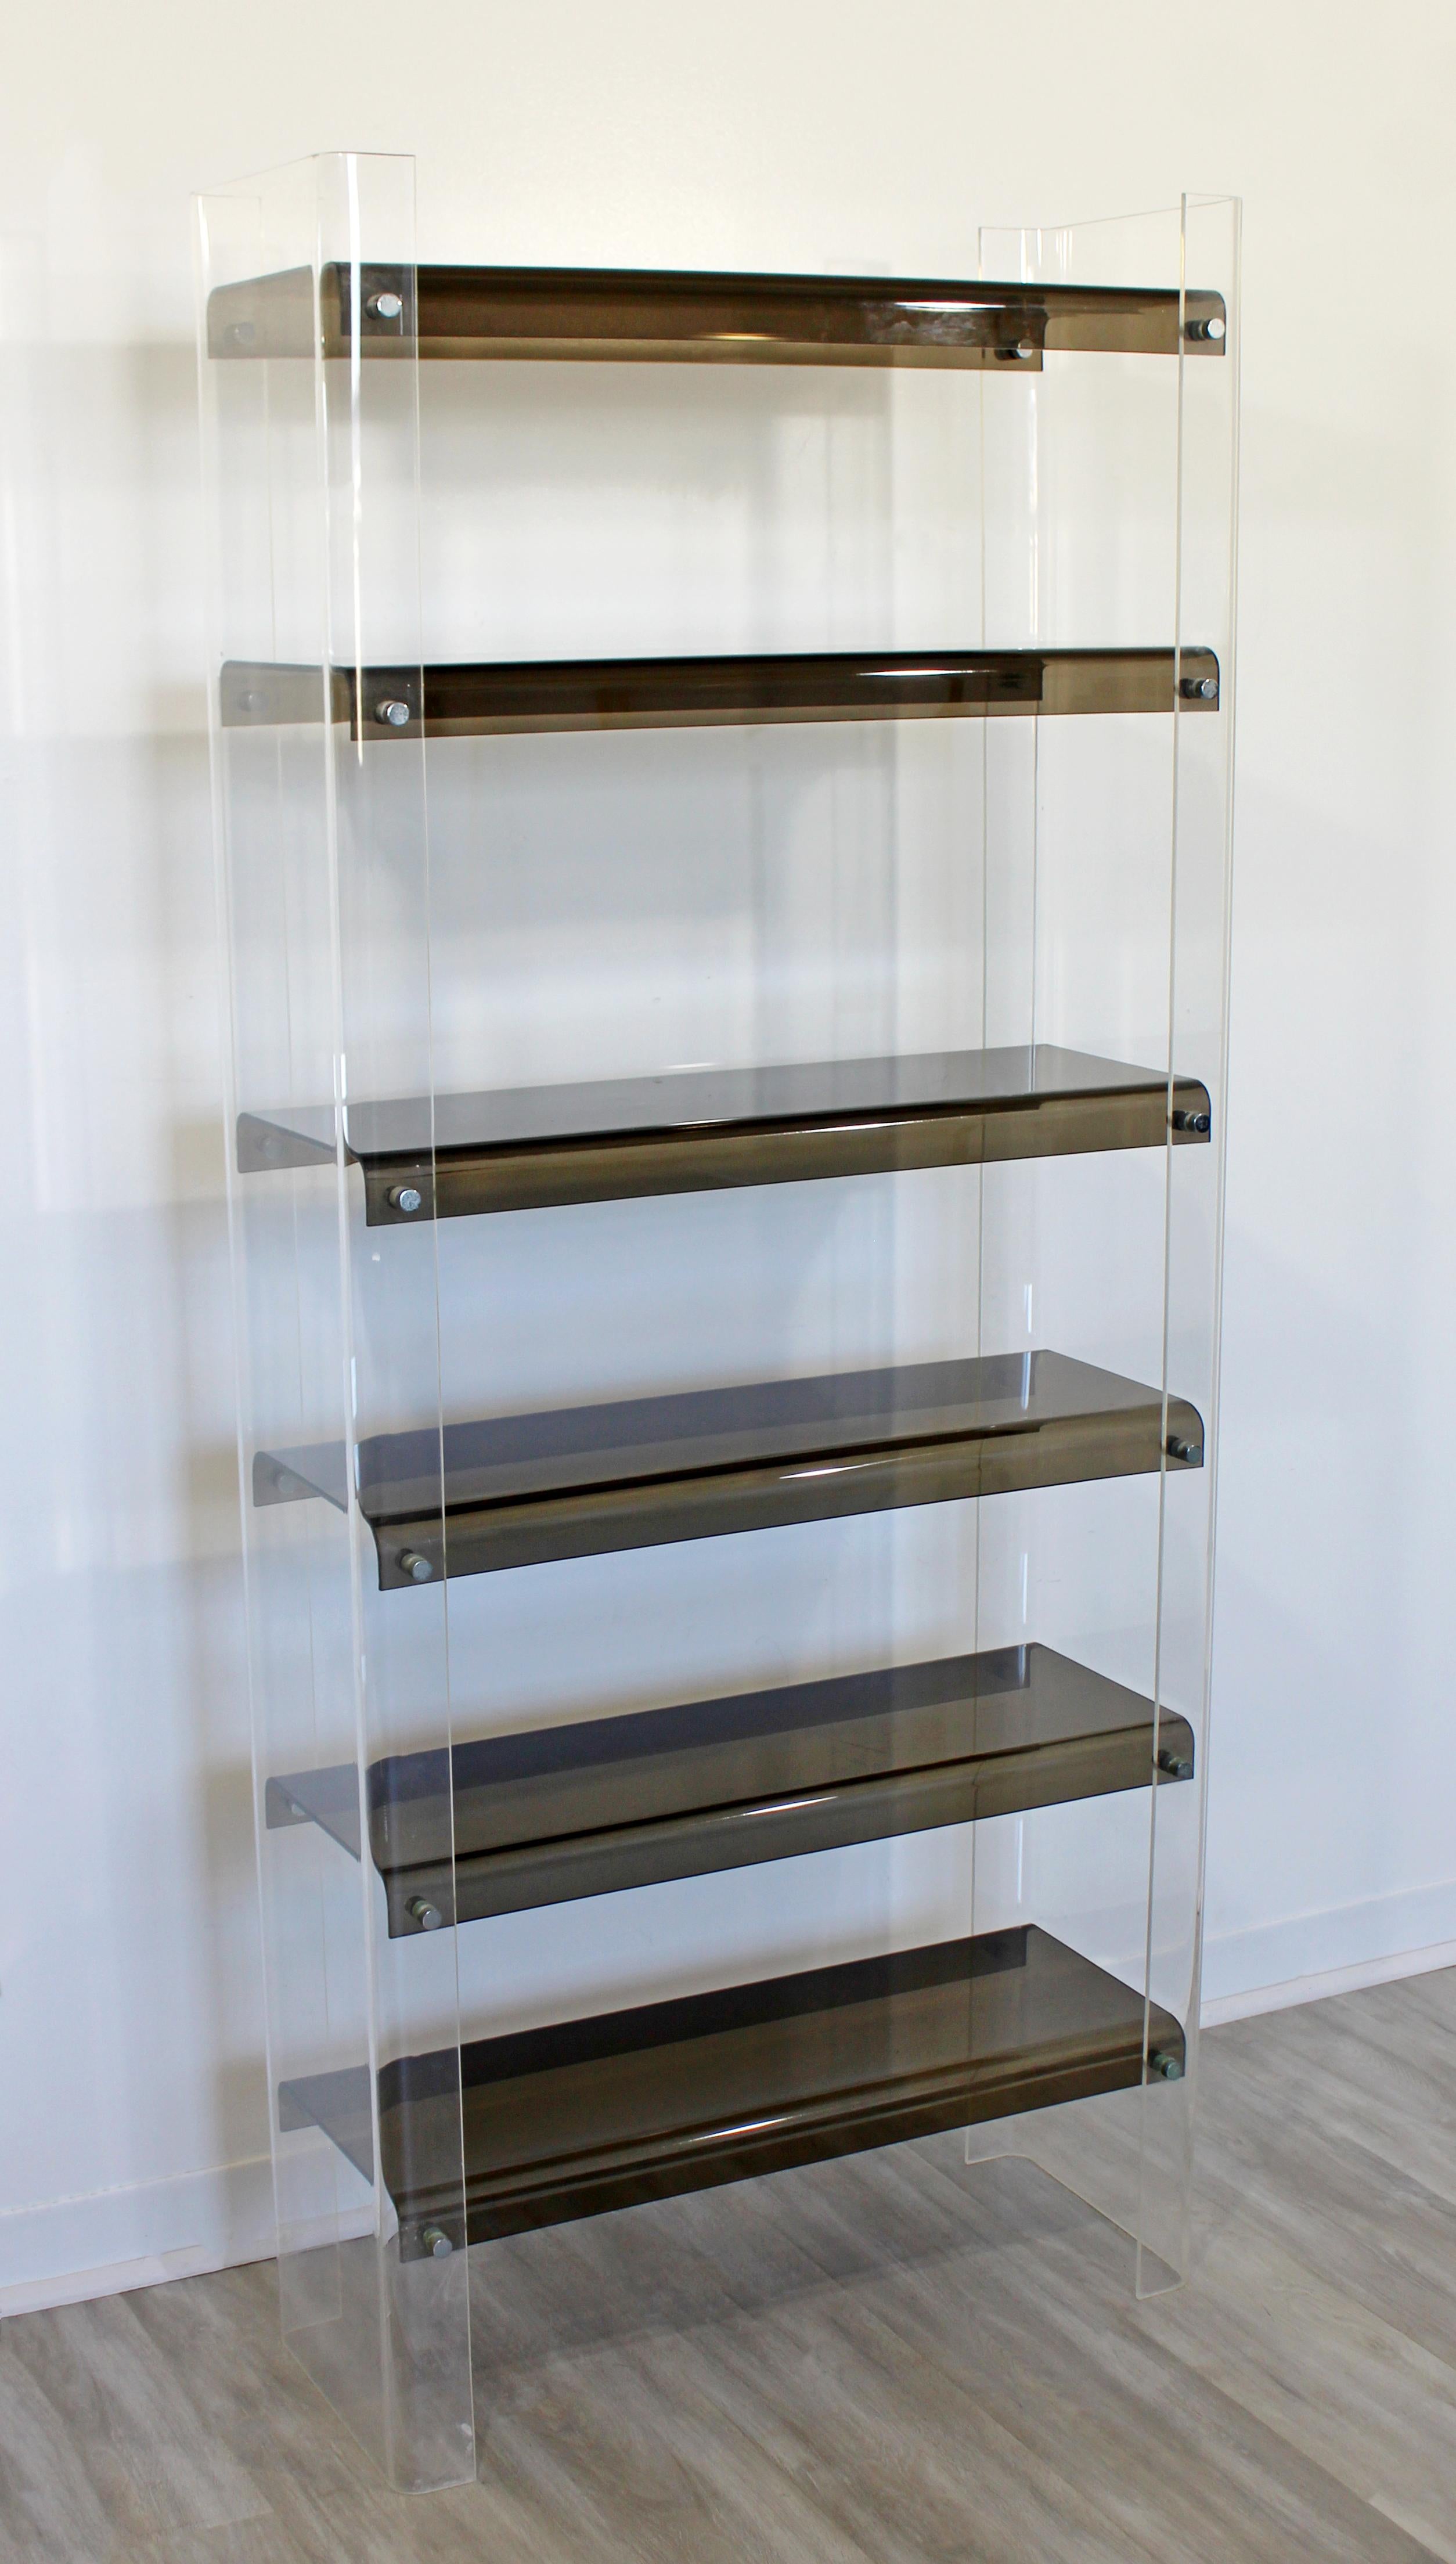 For your consideration is a Classic and chic, smoked and clear Lucite shelving unit, étagère, bookcase, with six shelves, circa 1970s. In excellent condition. The dimensions are 30